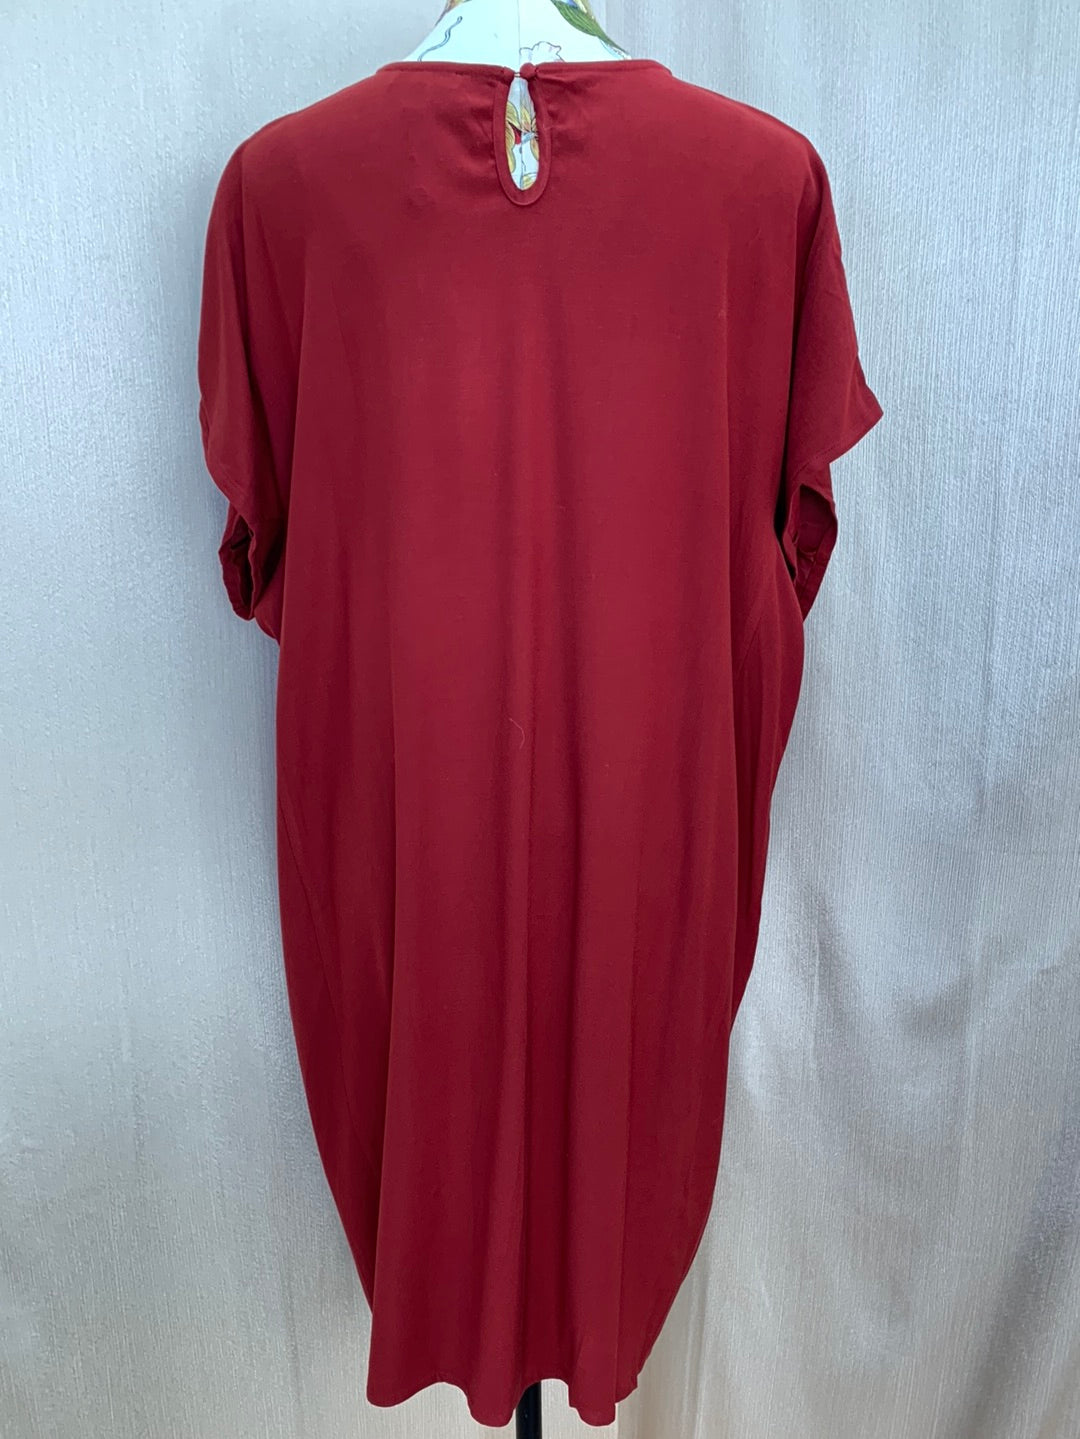 NWT - UNIVERSAL STANDARD sangria red Isabelle Twill Sheath Dress - M | 18-20